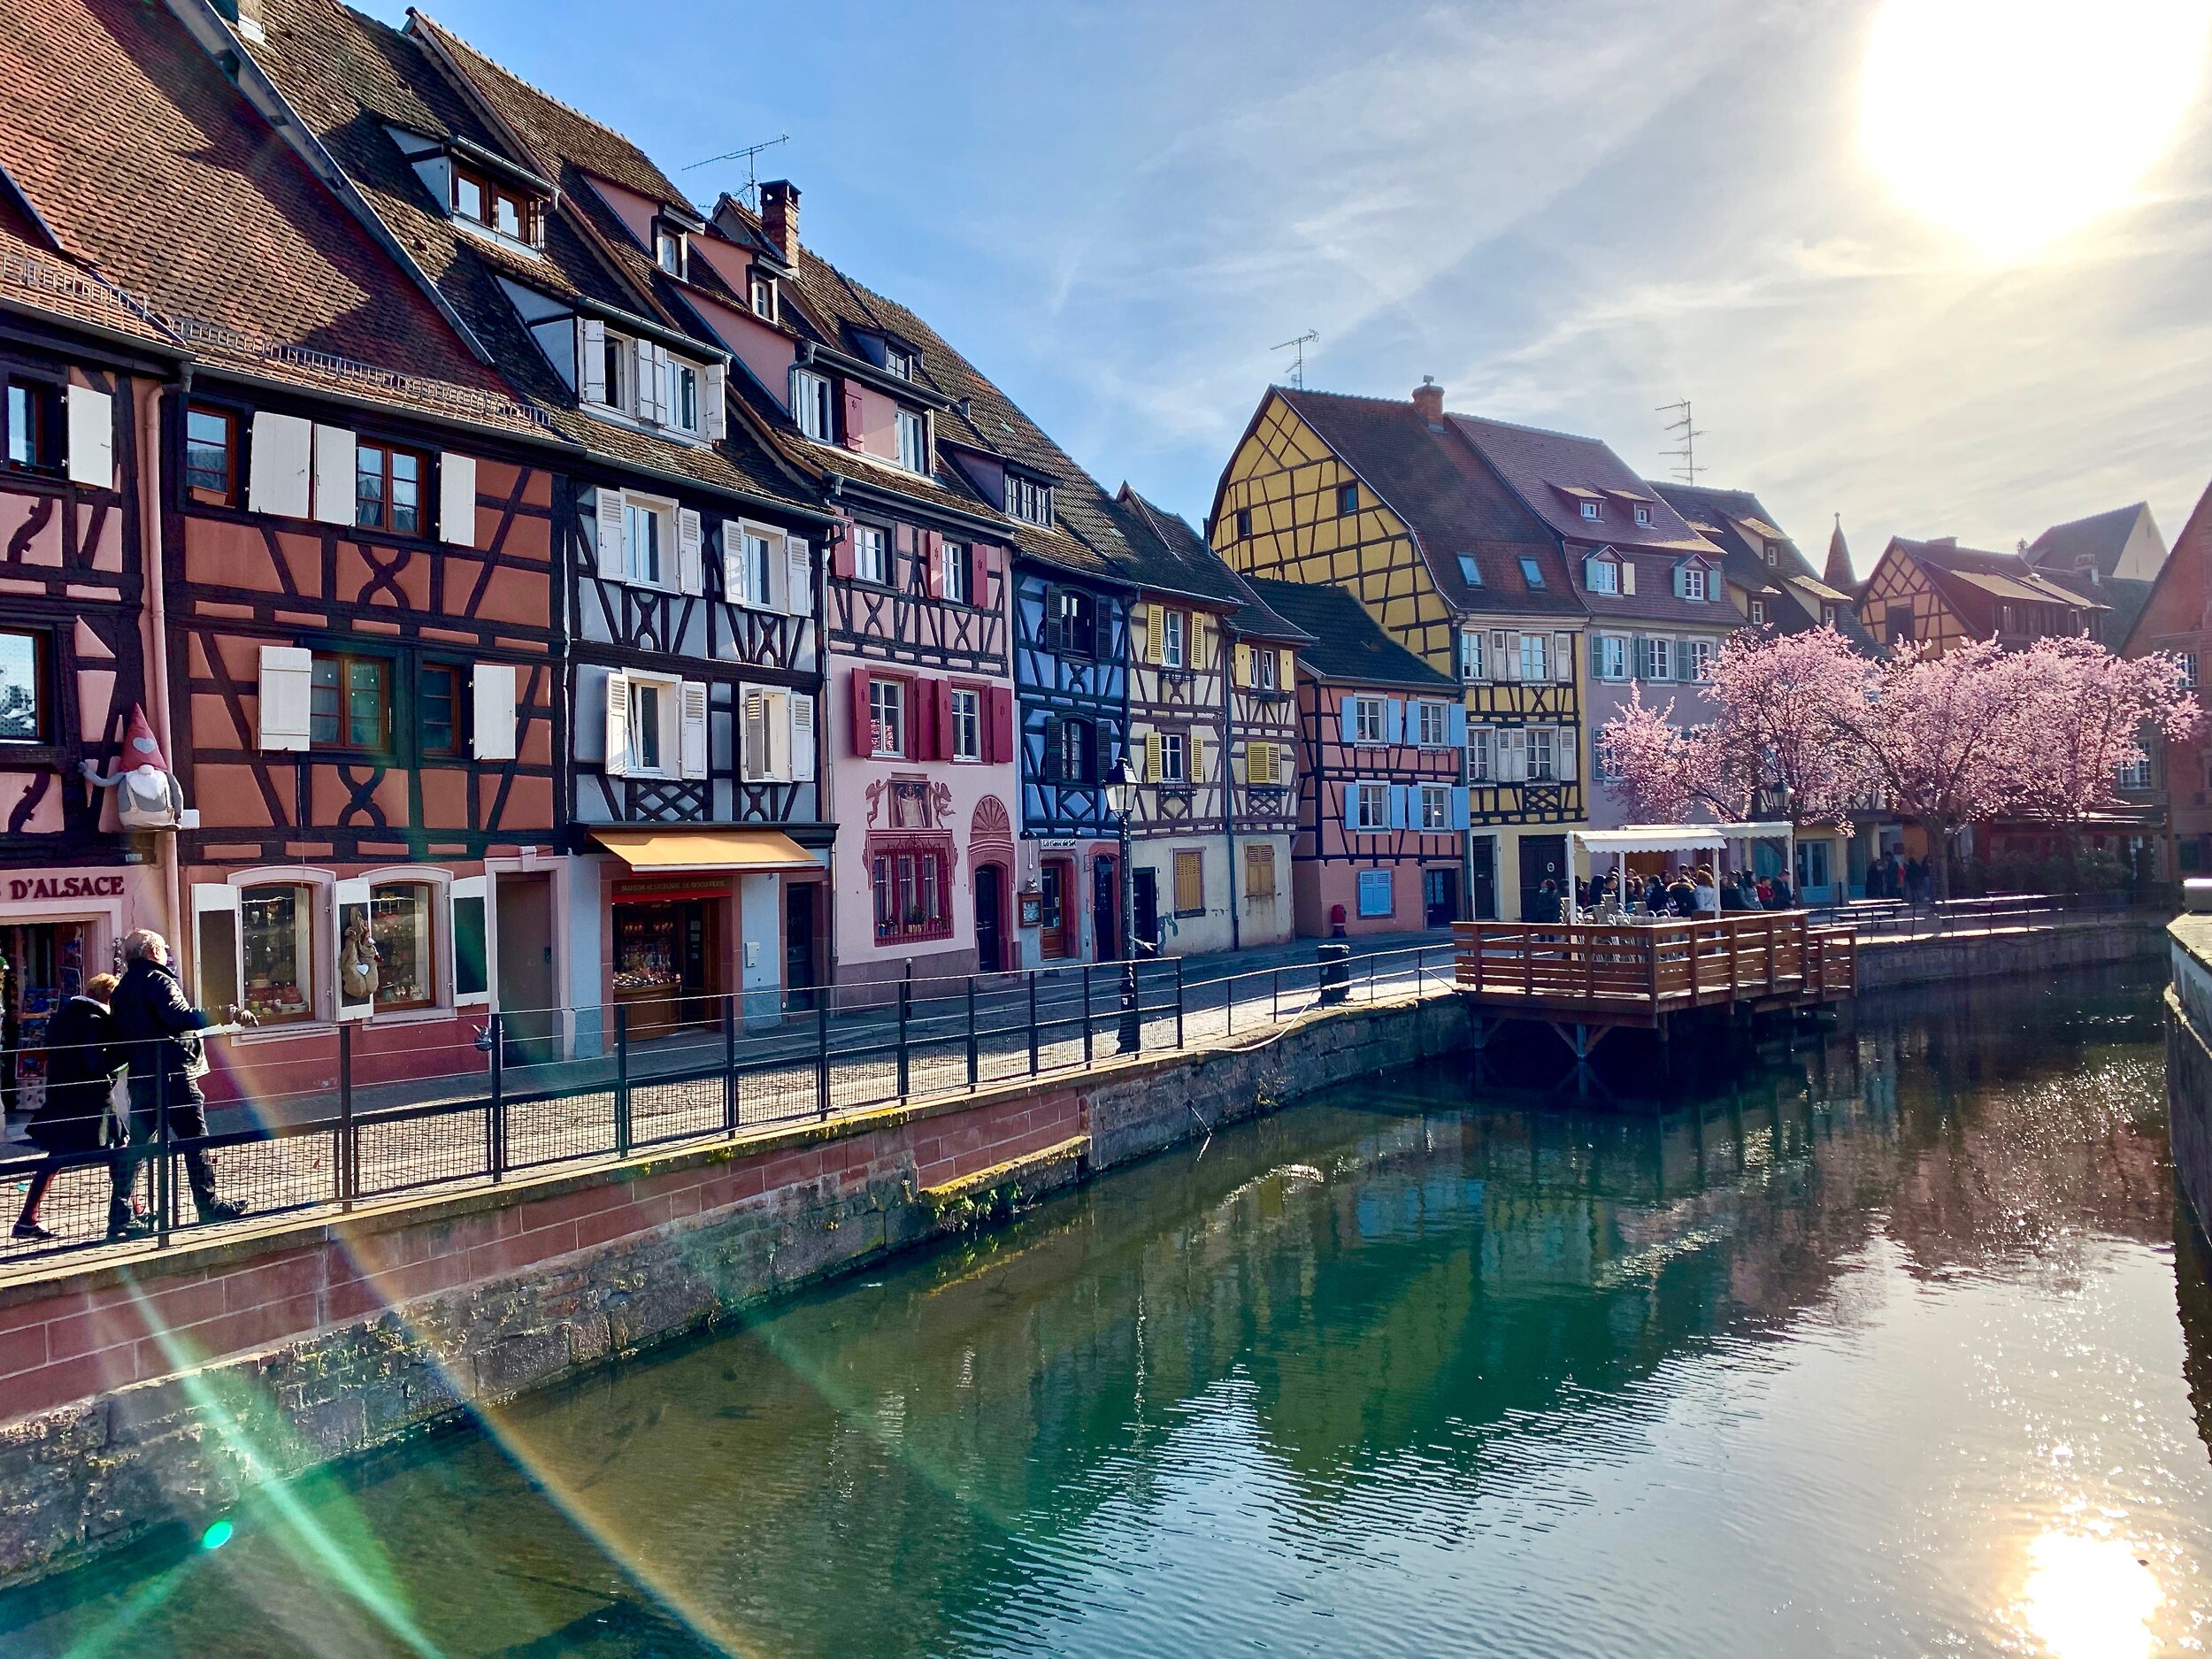 The picture book city of Colmar in the Alsace region of France